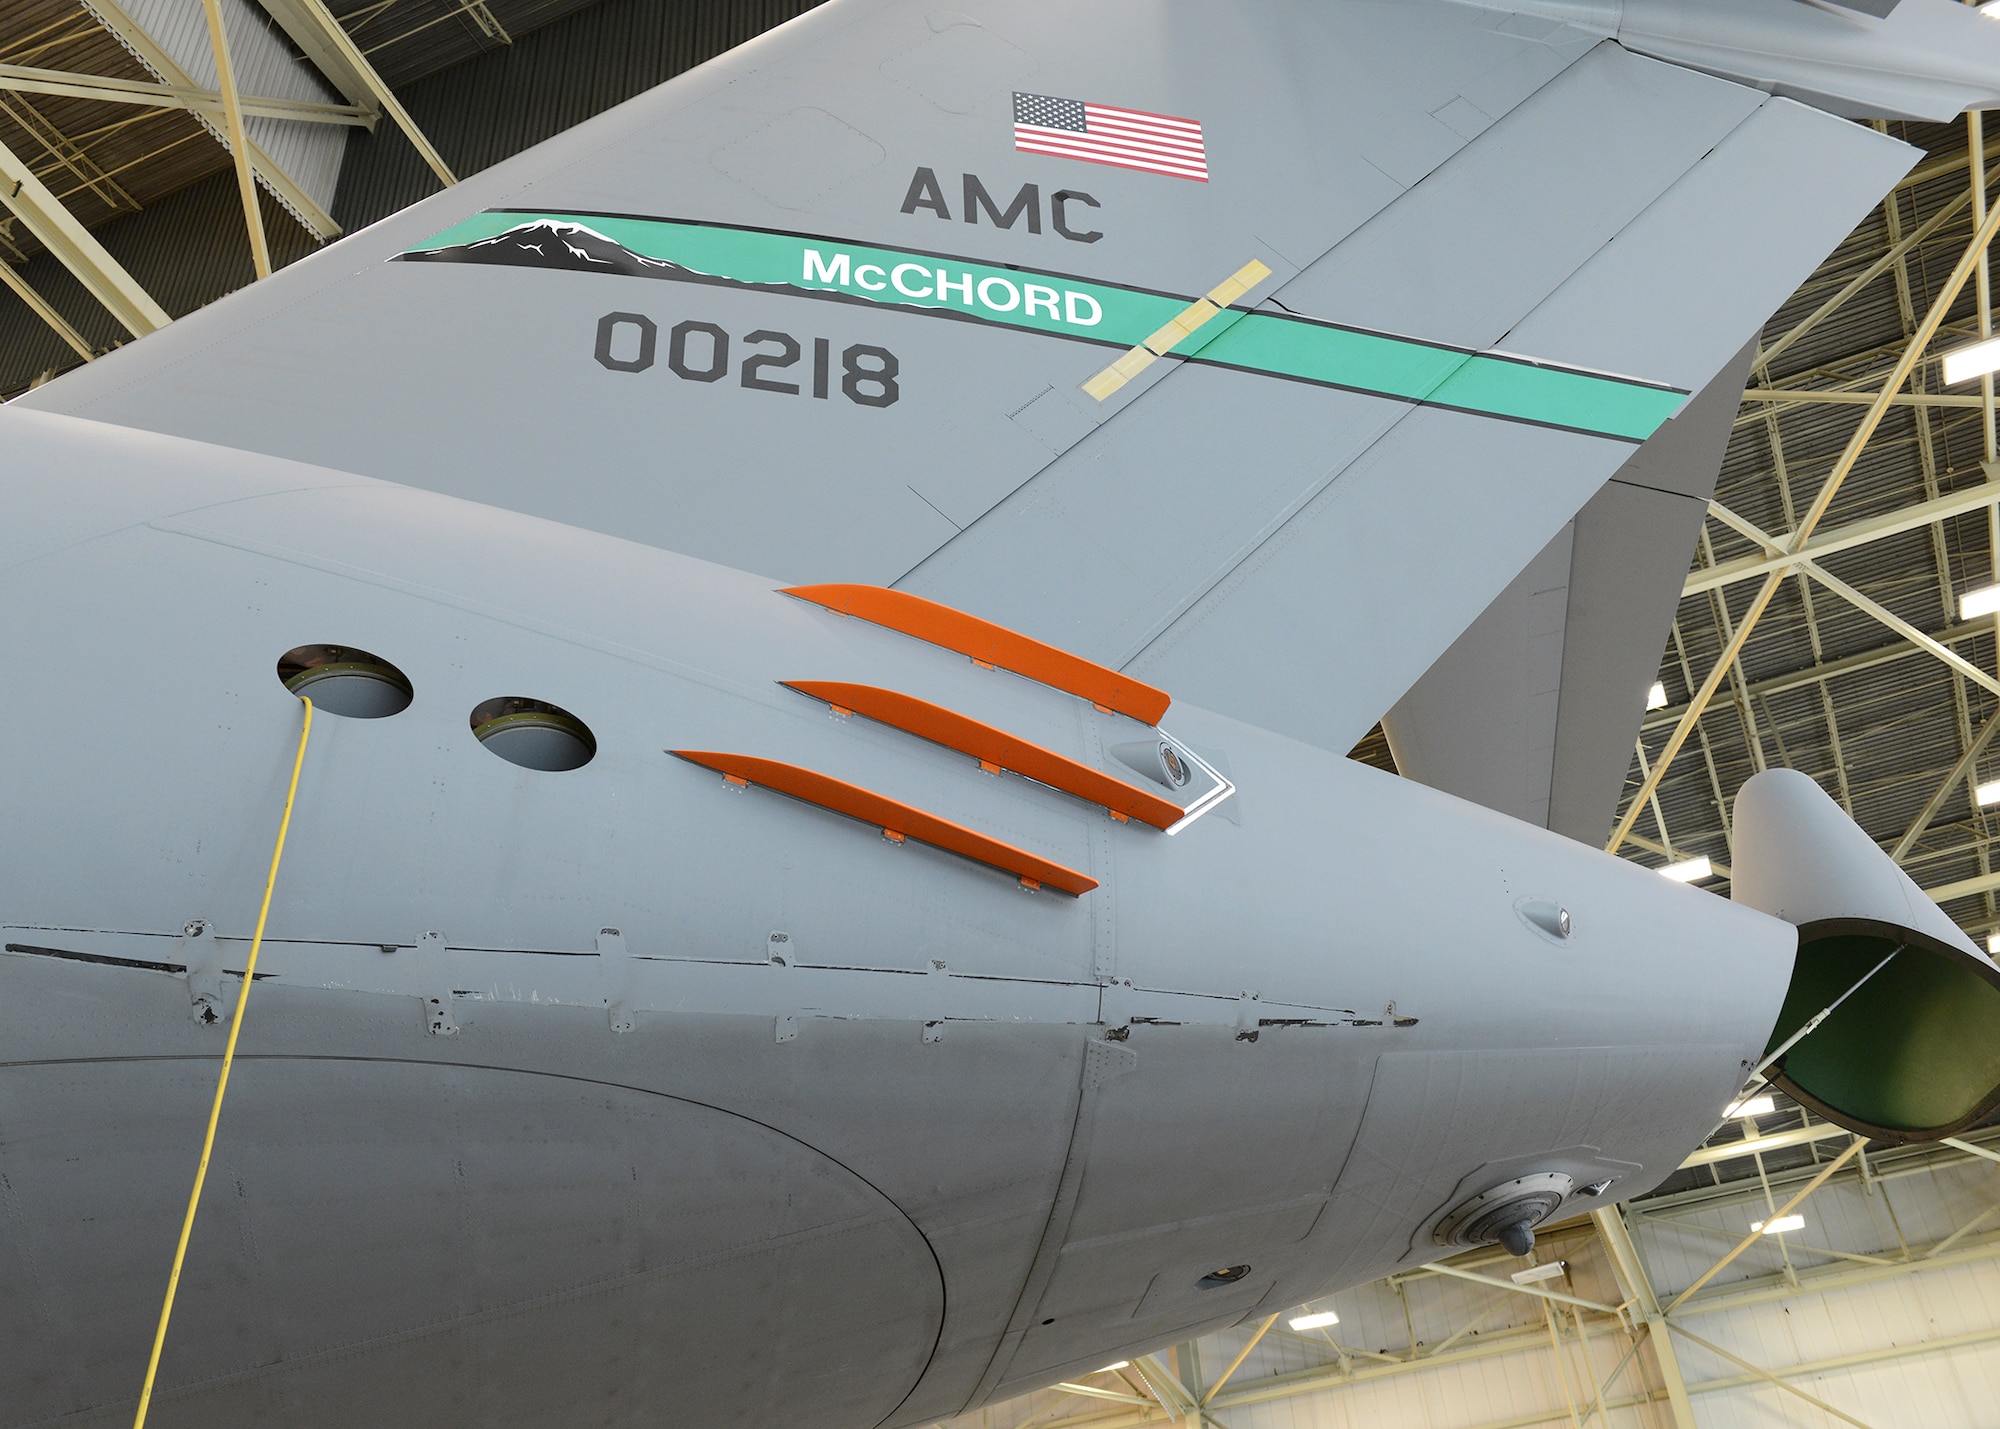 The first phase of C-17 Globemaster III drag reduction testing consisted of putting six orange Finlets on the aft part of the fuselage. A C-17 on loan from Joint Base McChord-Lewis, Washington, is the test plane for the program. With three Finlets on each side, test sorties were conducted to see how the C-17 performed with the modification. (U.S. Air Force photo/Kenji Thuloweit) 